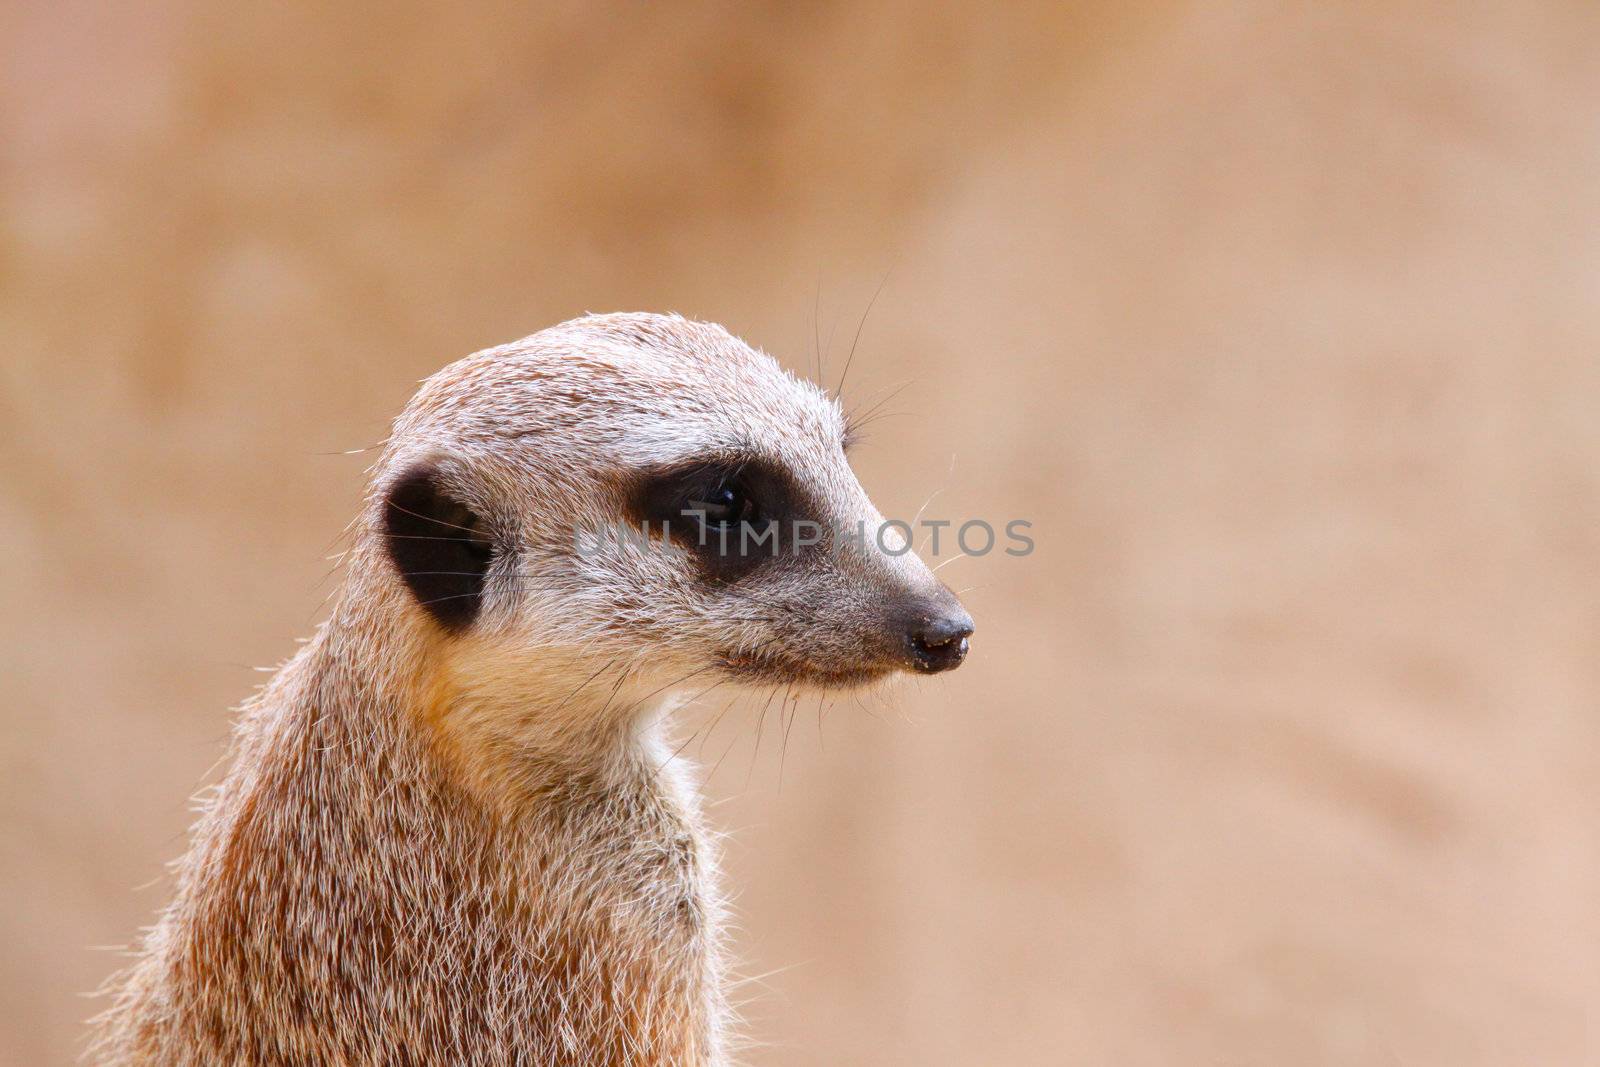 Upright Meerkat on Sentry with Matching/Camouflage Background by Cloudia